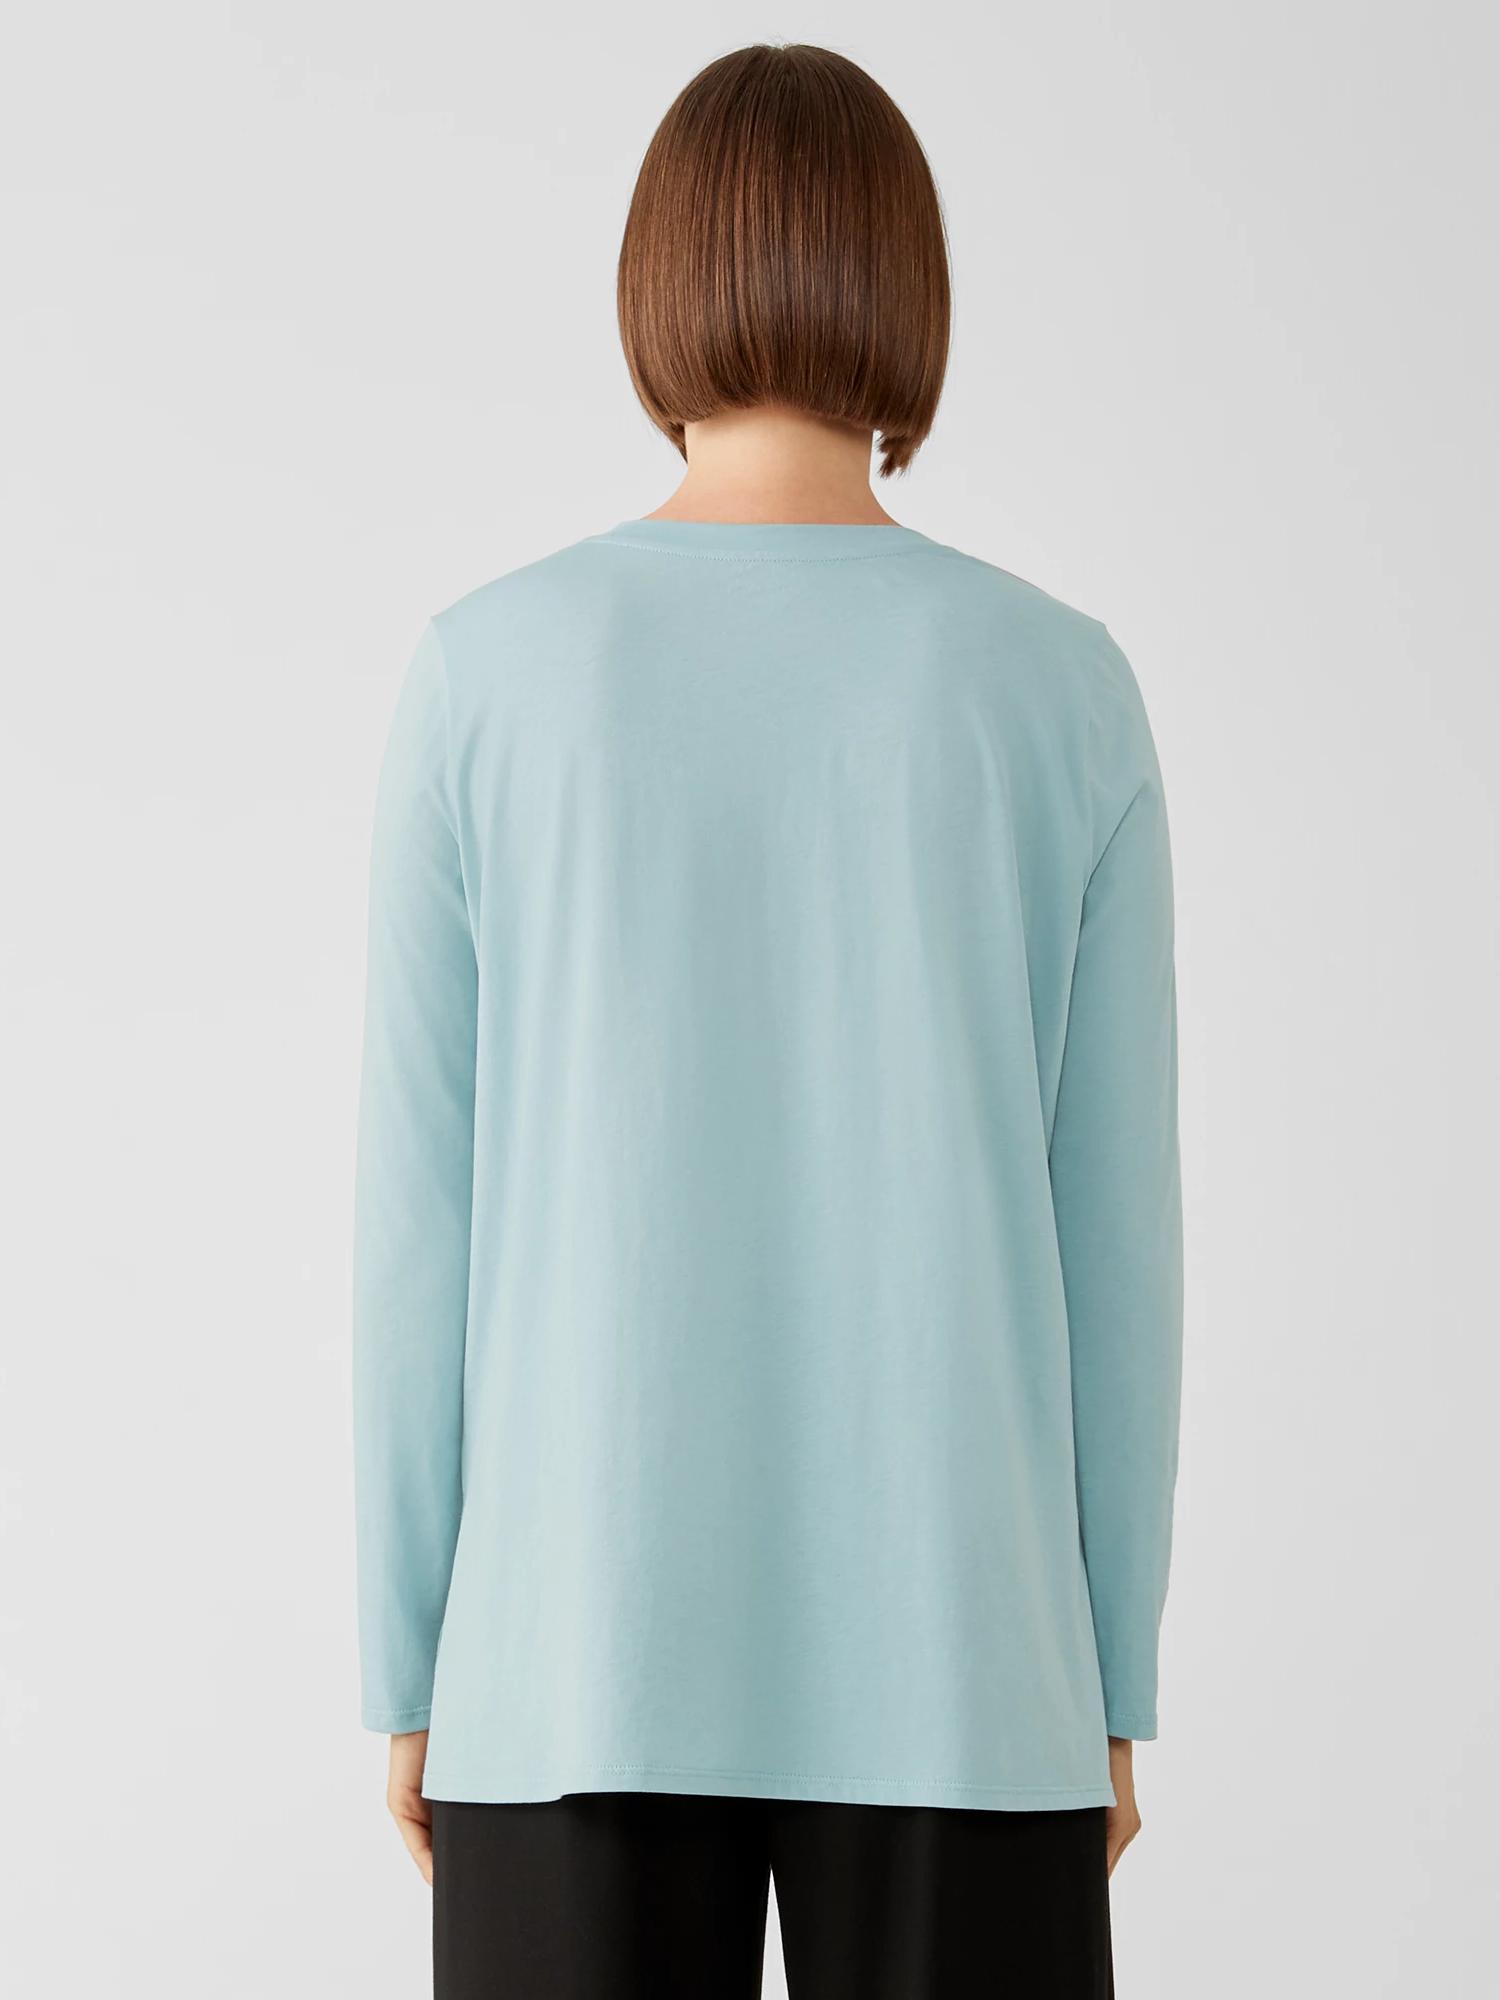 Eileen Fisher Organic Cotton Easy Jersey Crew Neck Top in Blue | Lyst